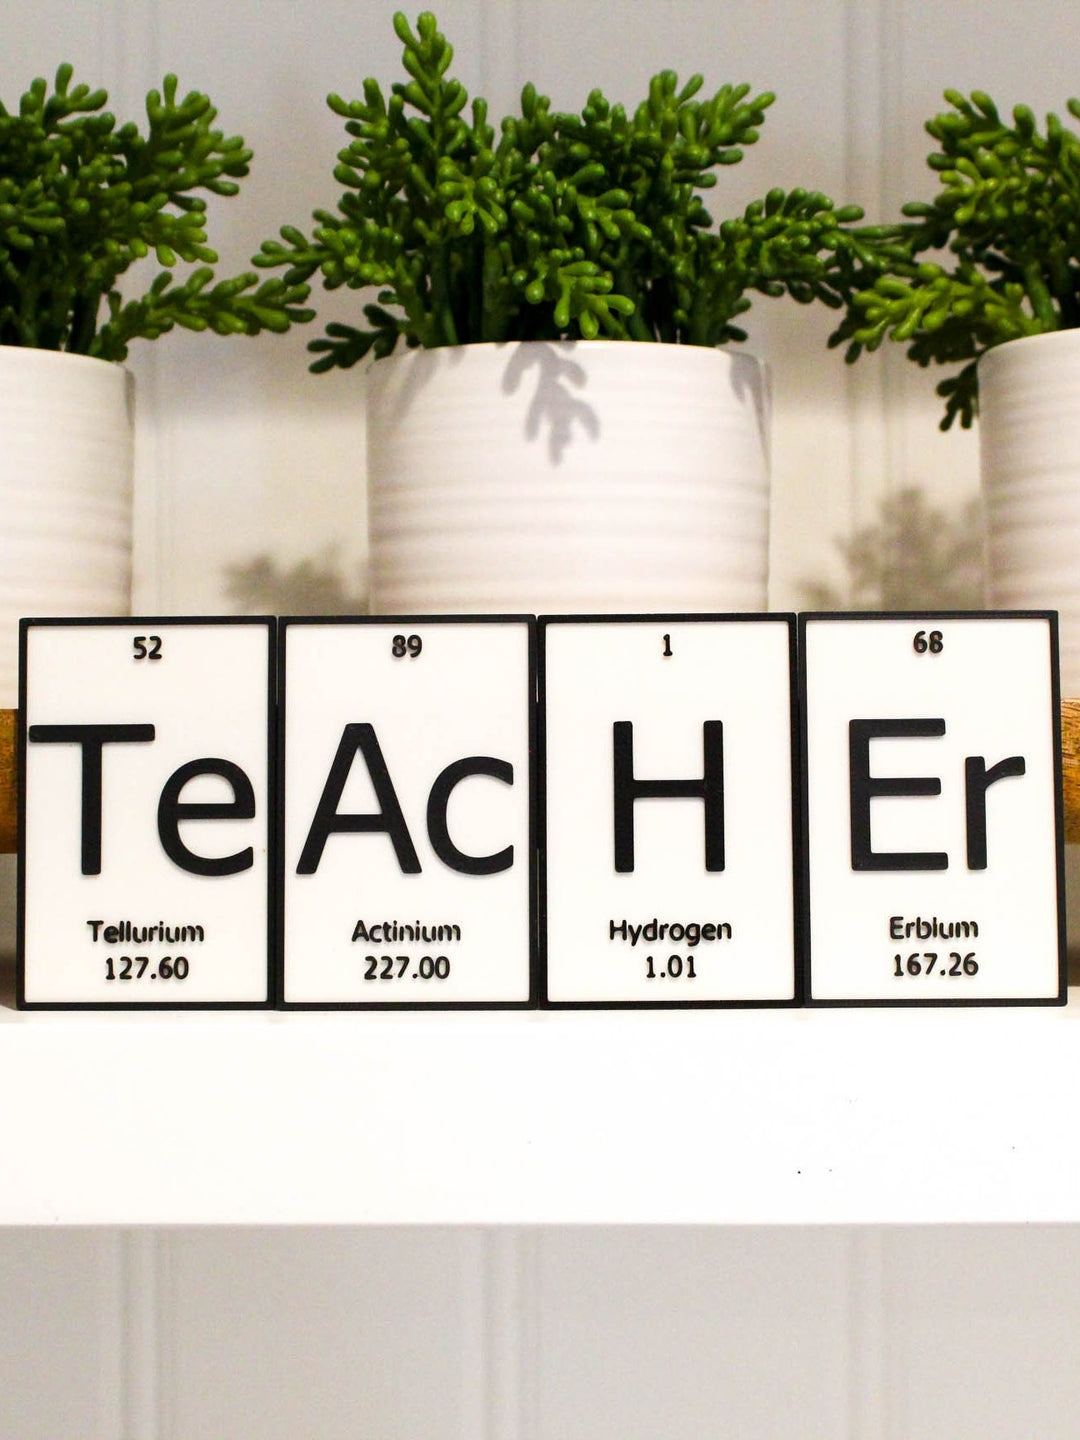 
  
  TeAcHEr | Periodic Table of Elements Wall, Desk or Shelf Sign
  
